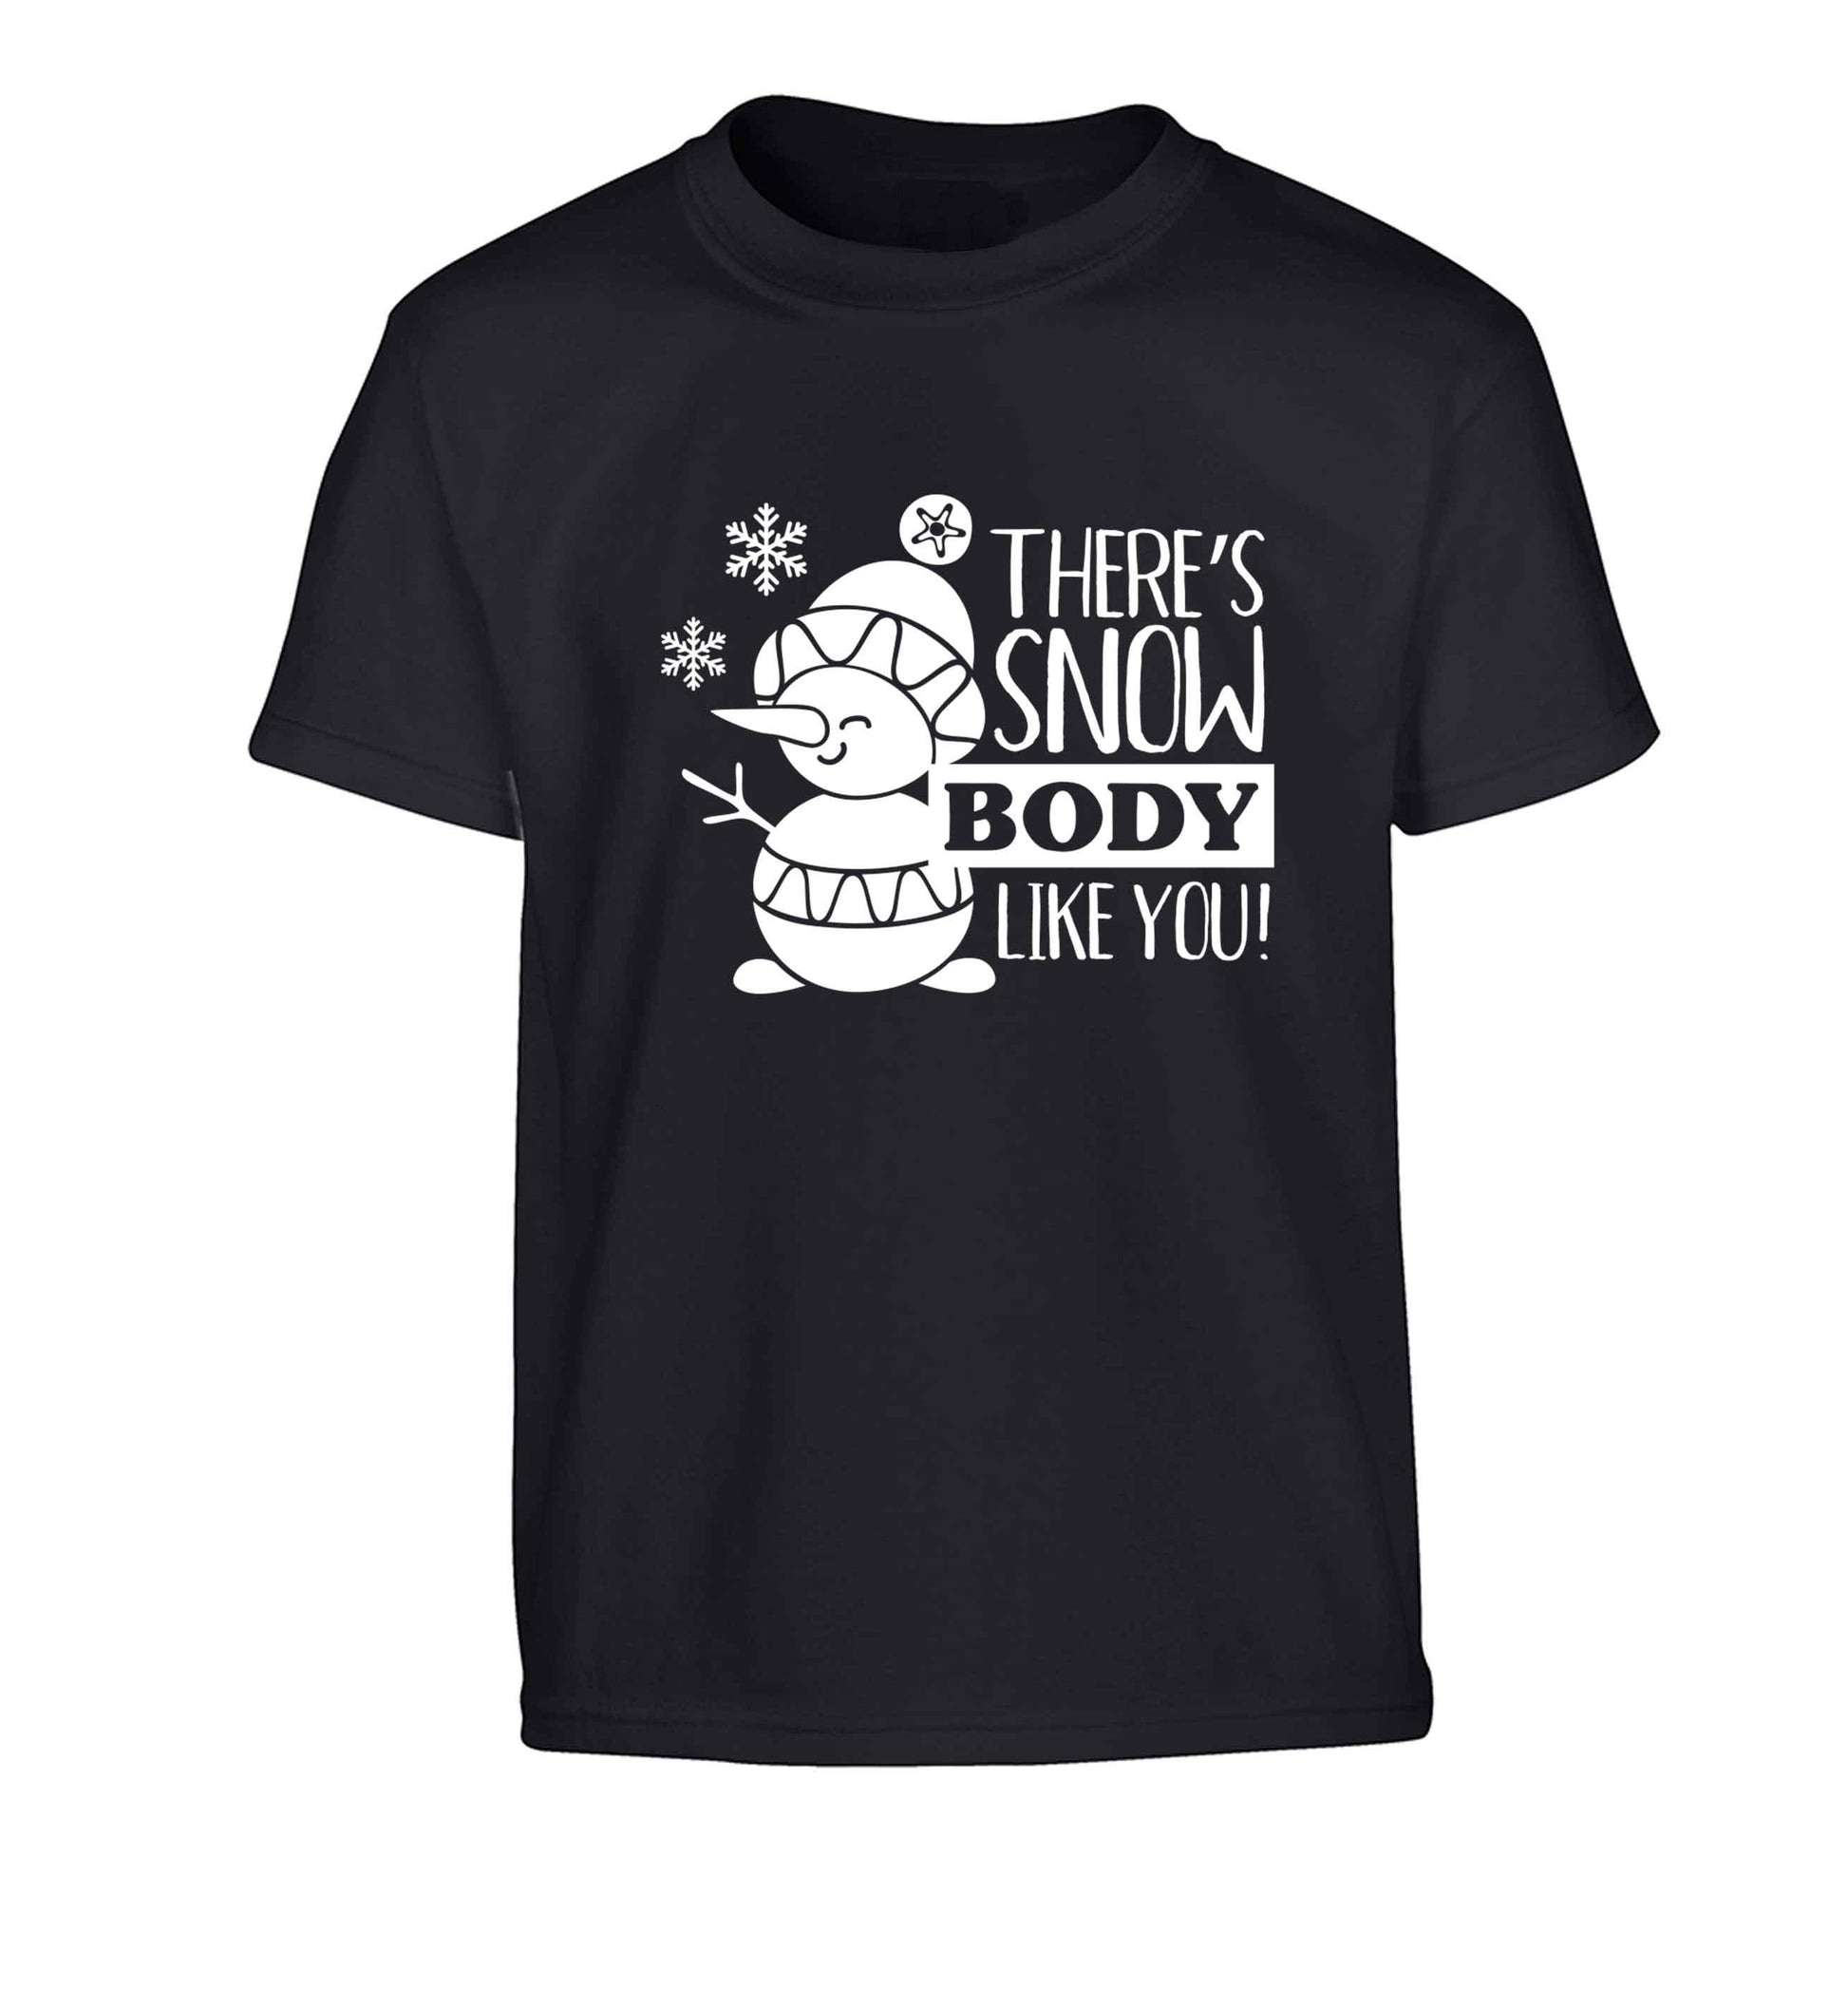 There's snow body like you Children's black Tshirt 12-13 Years